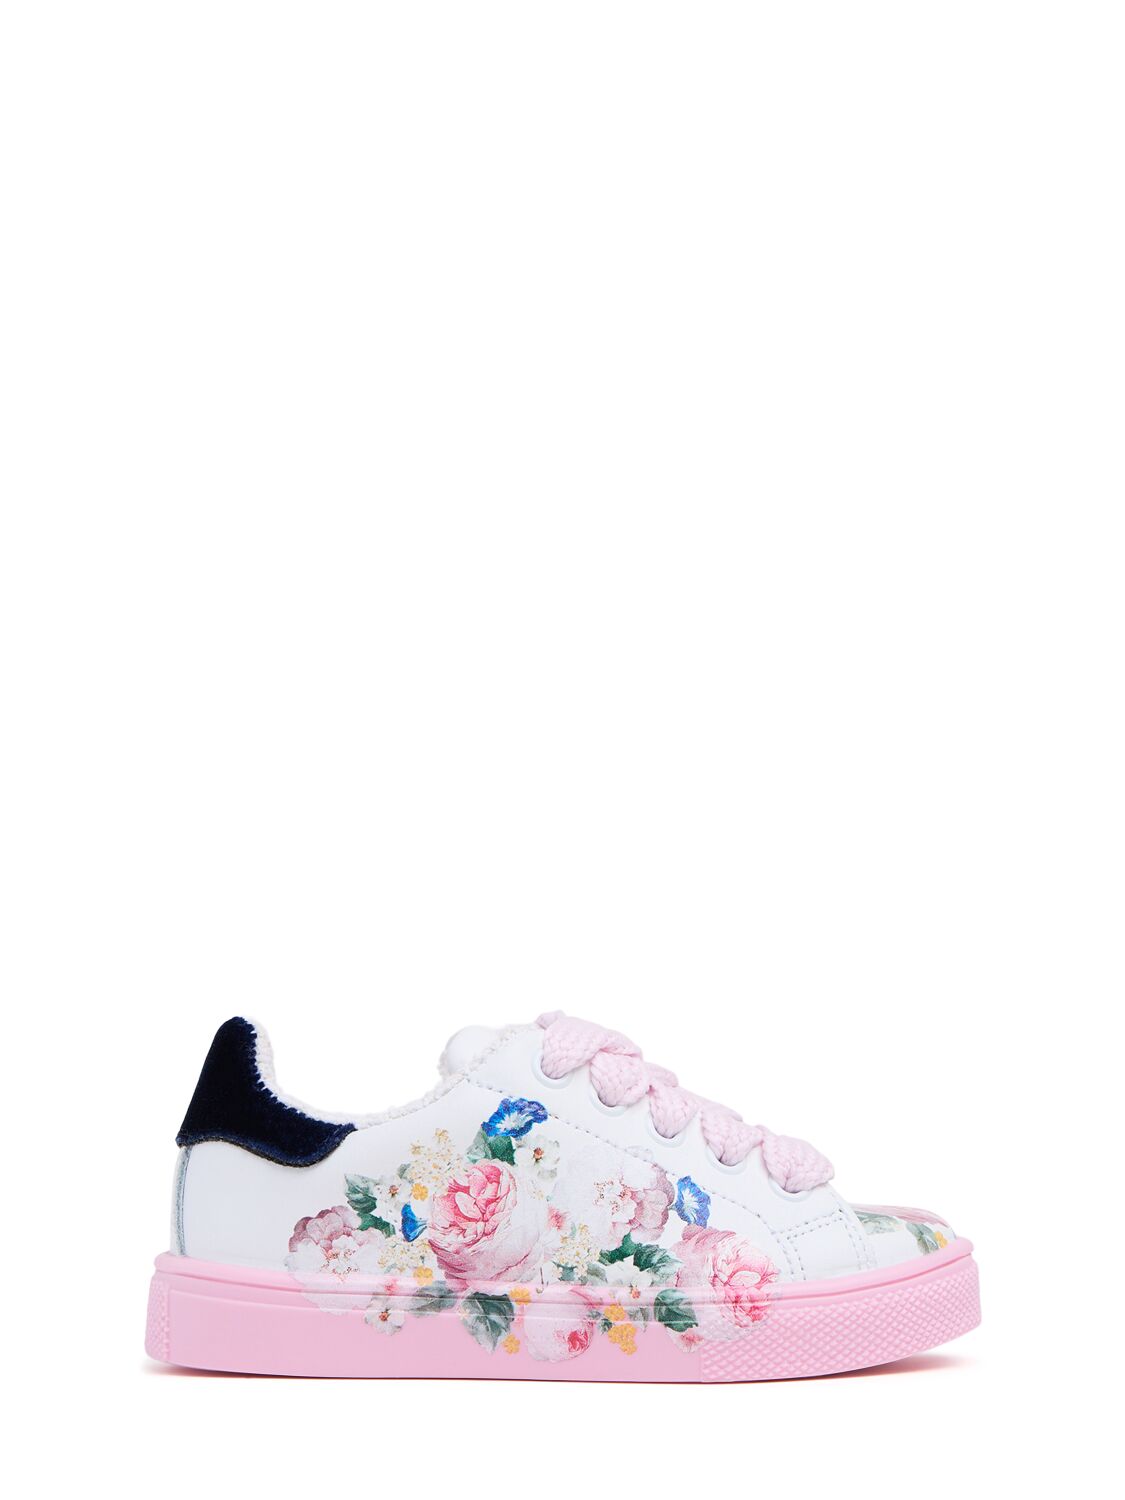 Monnalisa Floral Print Leather Lace-up Sneakers In White/pink